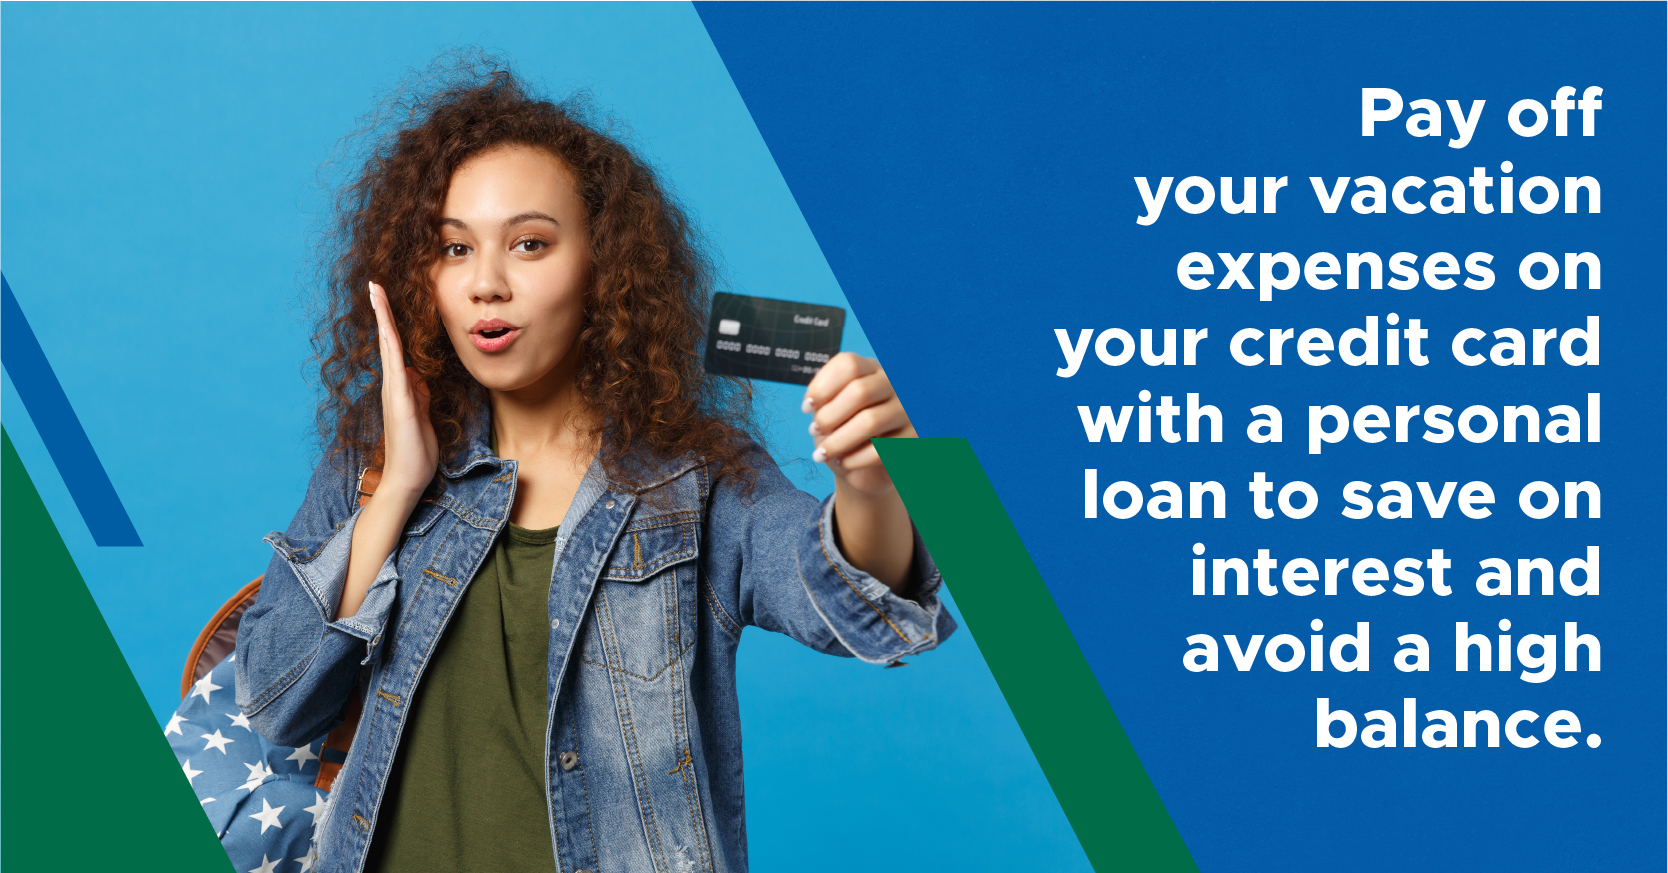 Pay off your vacation expenses on your credit card with a personal loan to save on interest and avoid a high balance - image of a young woman holding a backpack and a credit card